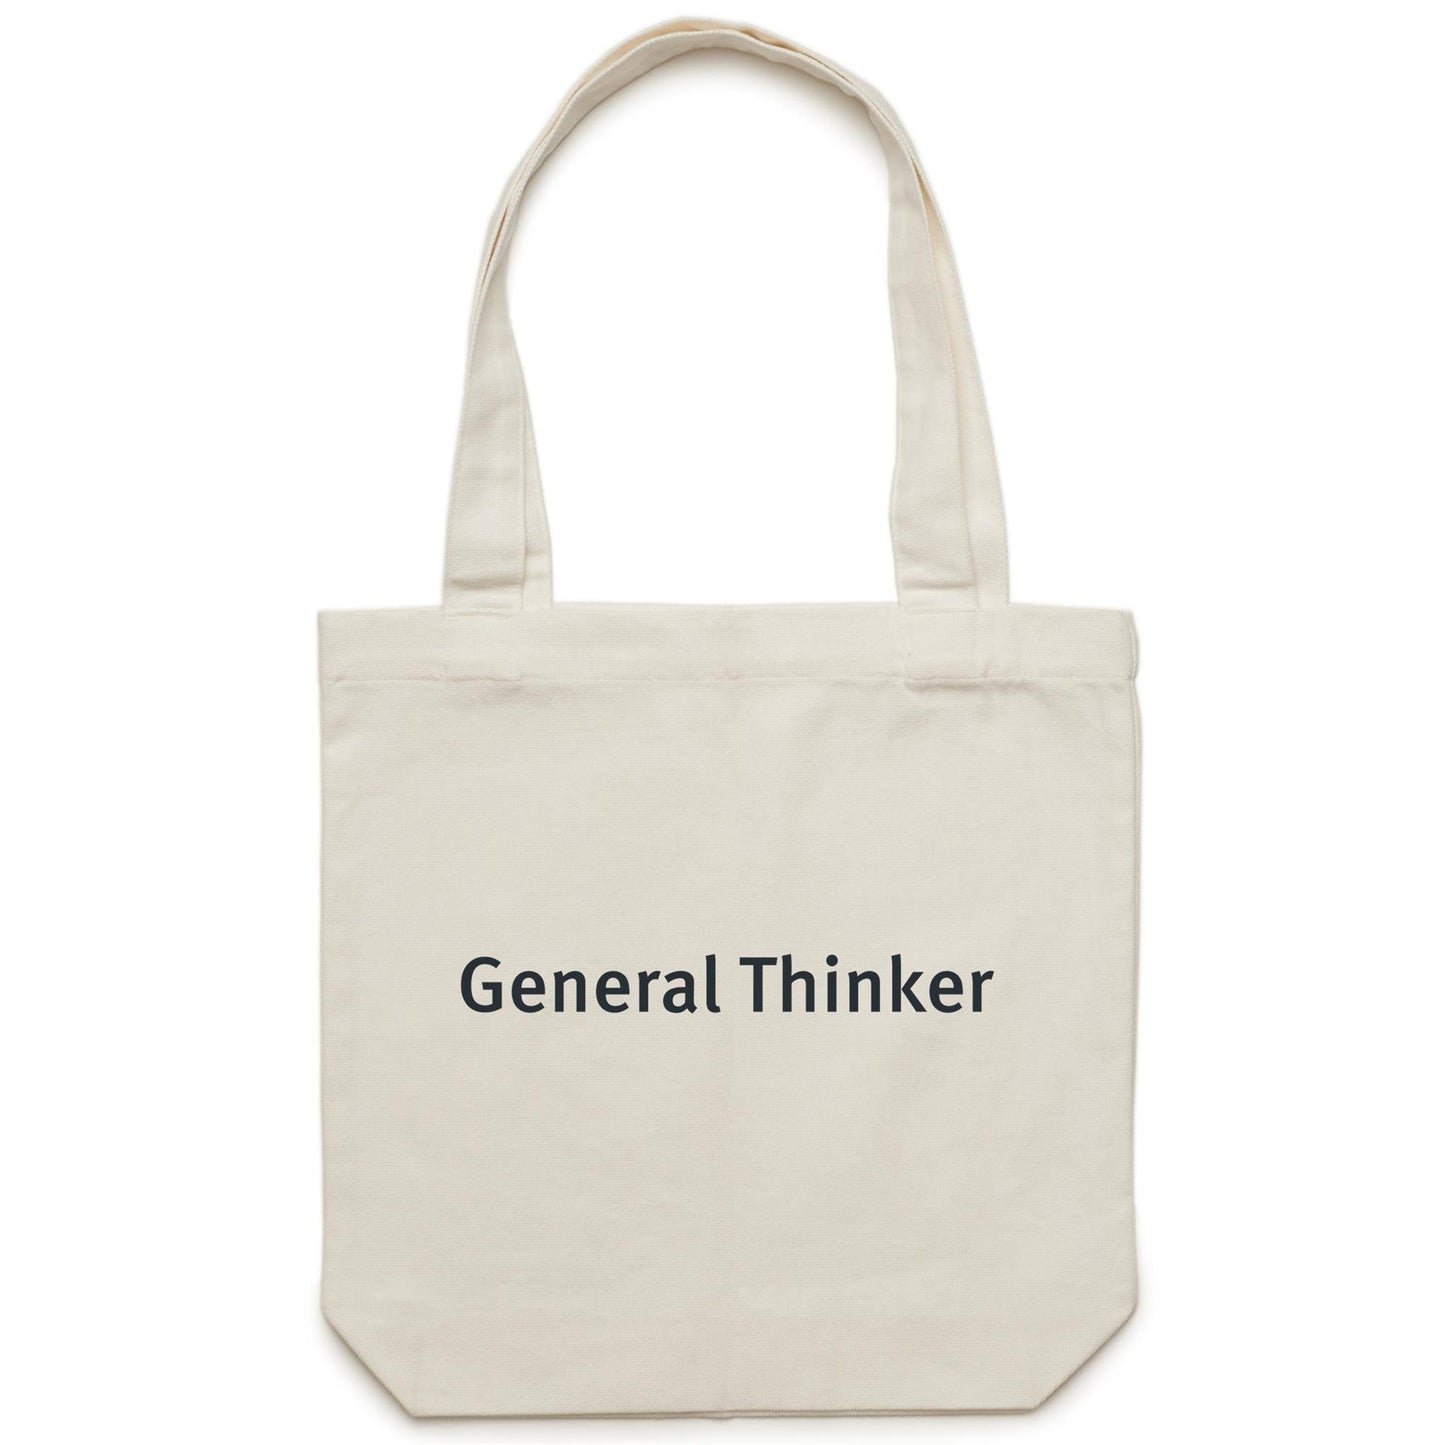 General Thinker Canvas Totes